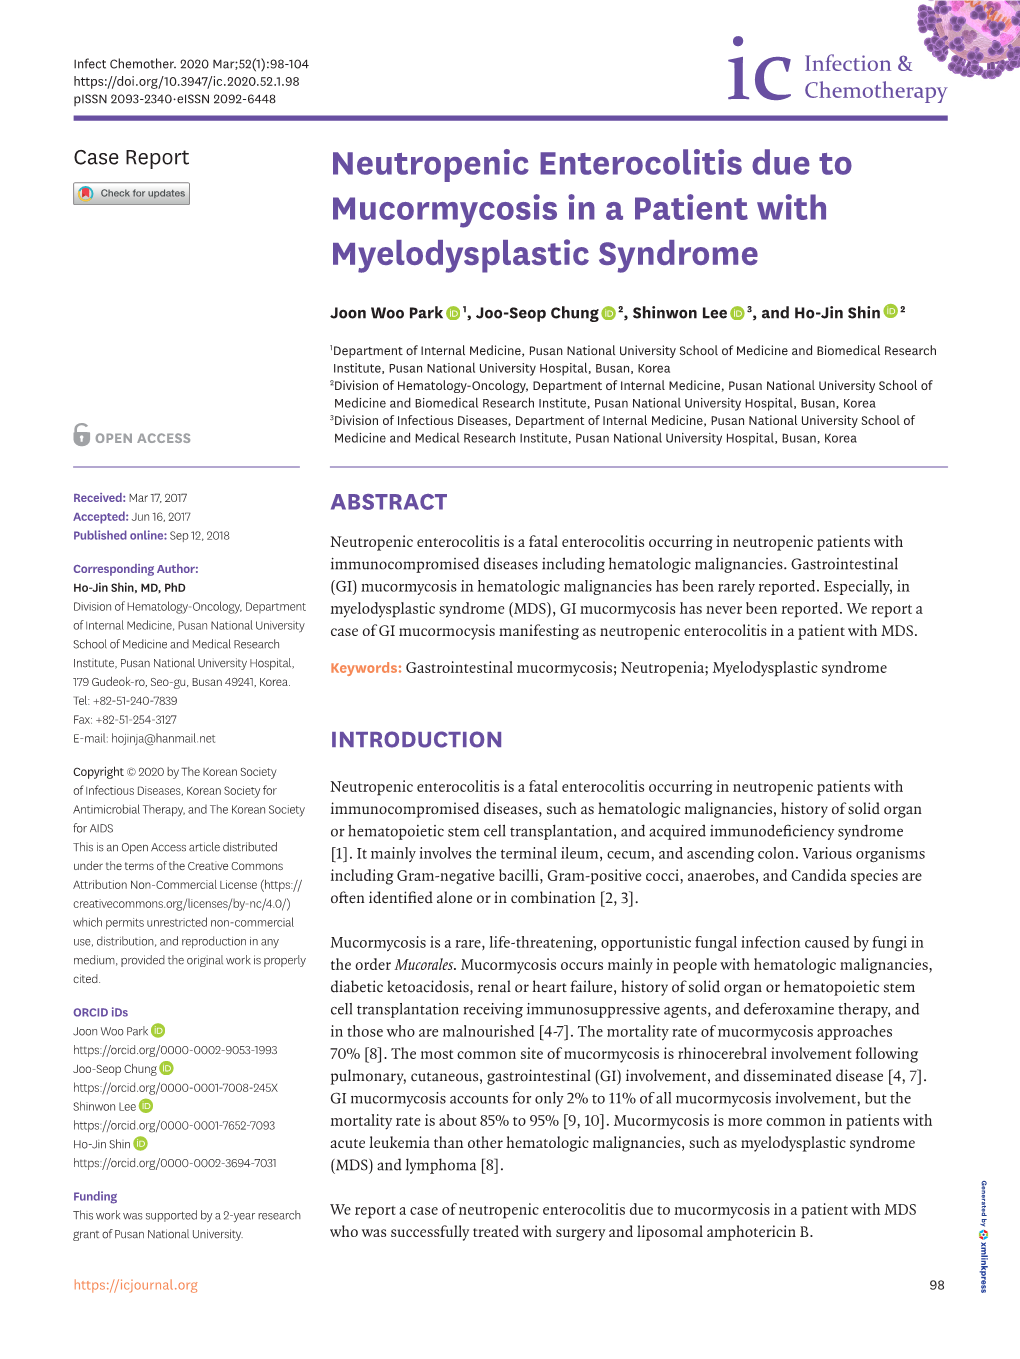 Neutropenic Enterocolitis Due to Mucormycosis in a Patient with Myelodysplastic Syndrome